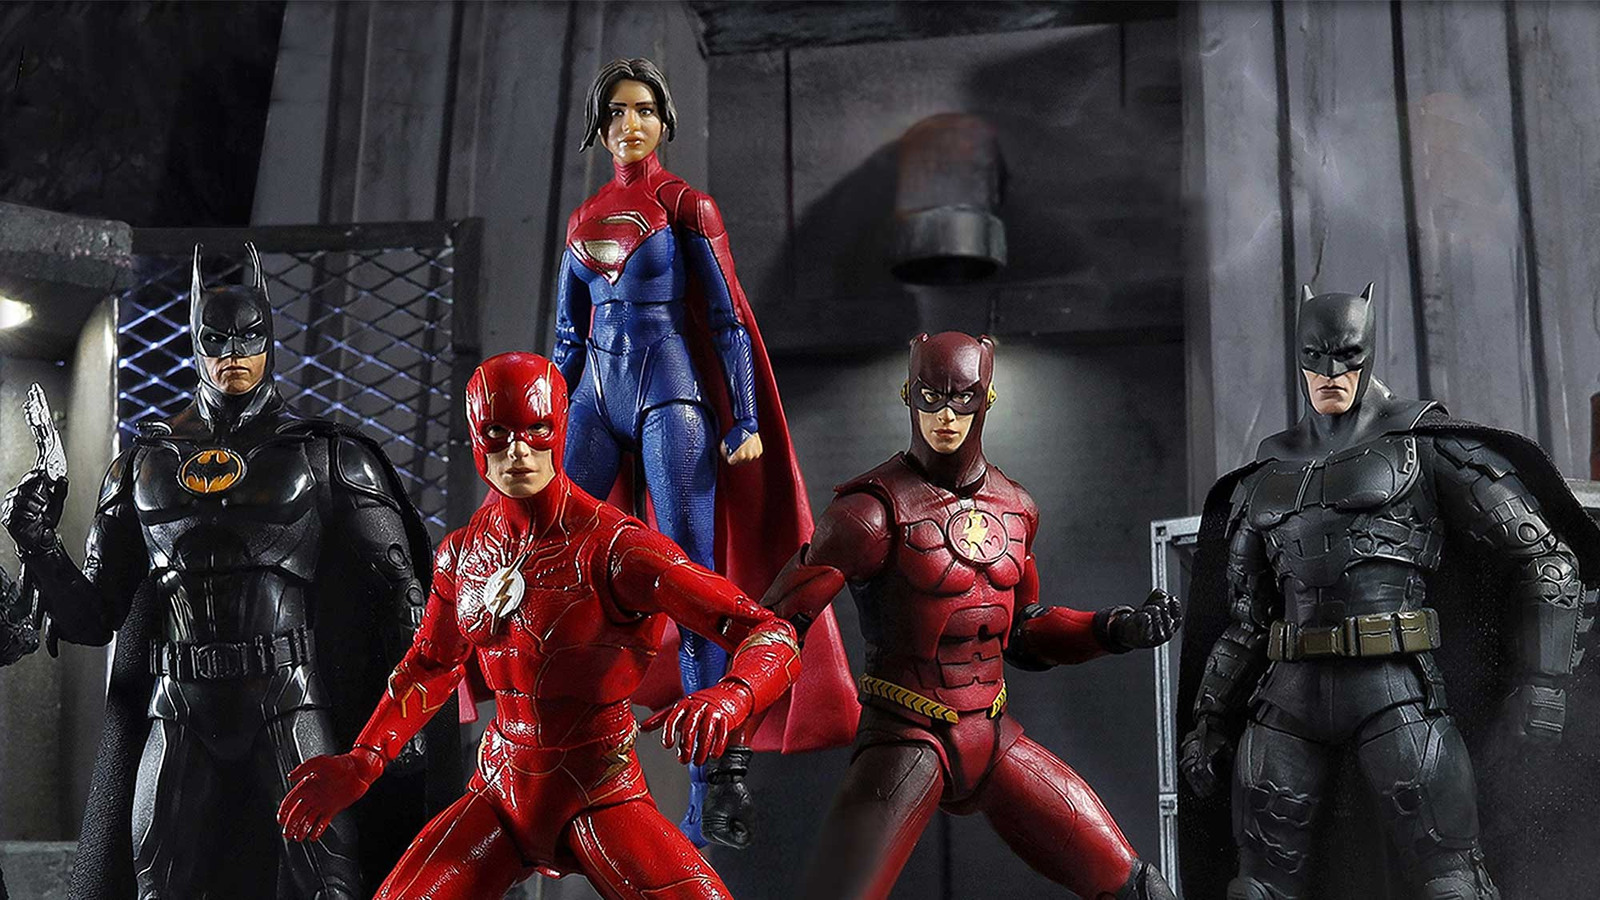 The Flash Movie Action Figures From McFarlane Toys Are